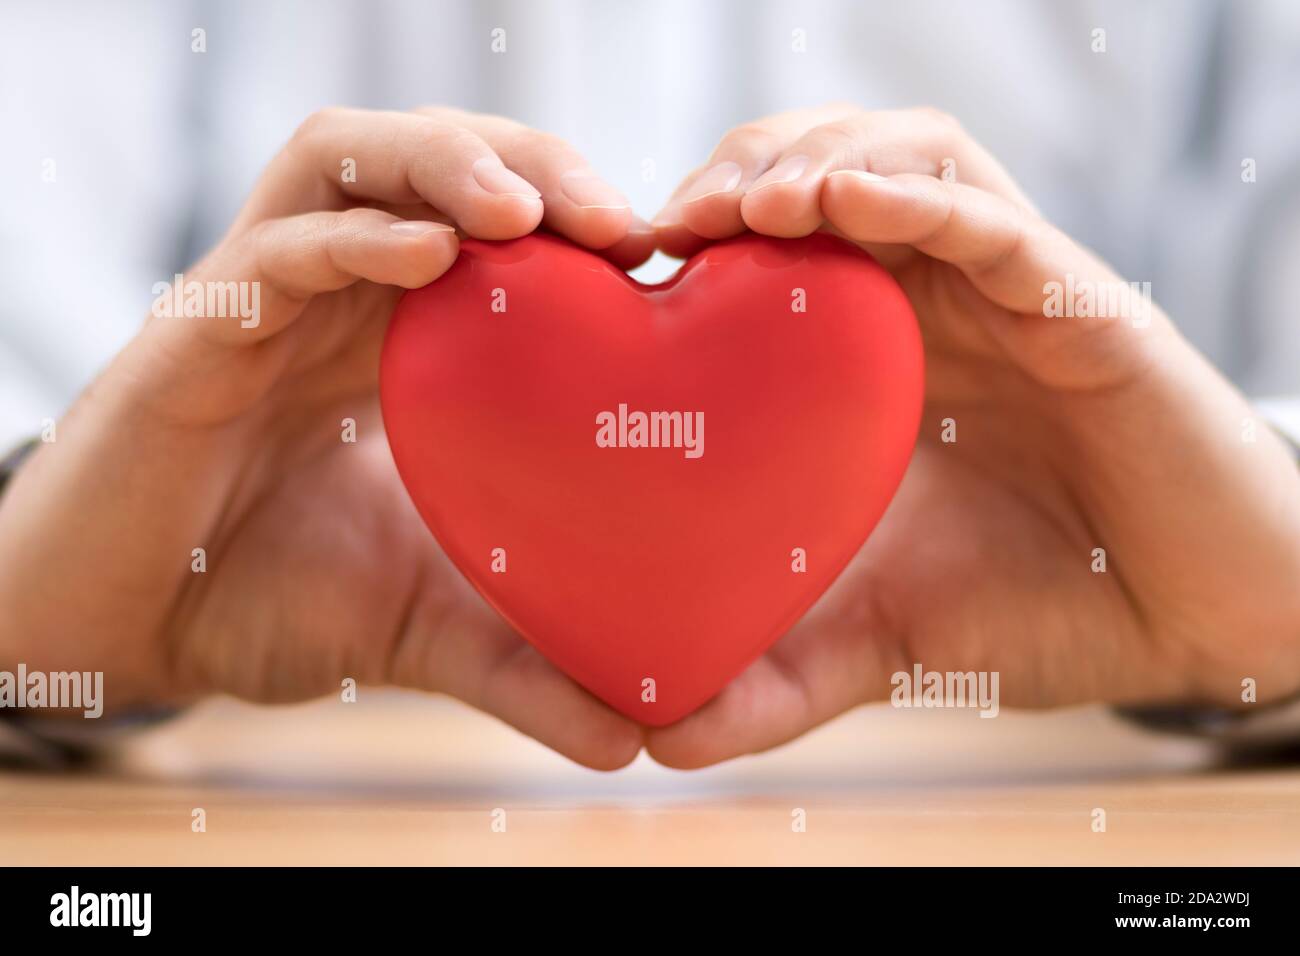 Red heart in hands. Health insurance or love concept. Stock Photo